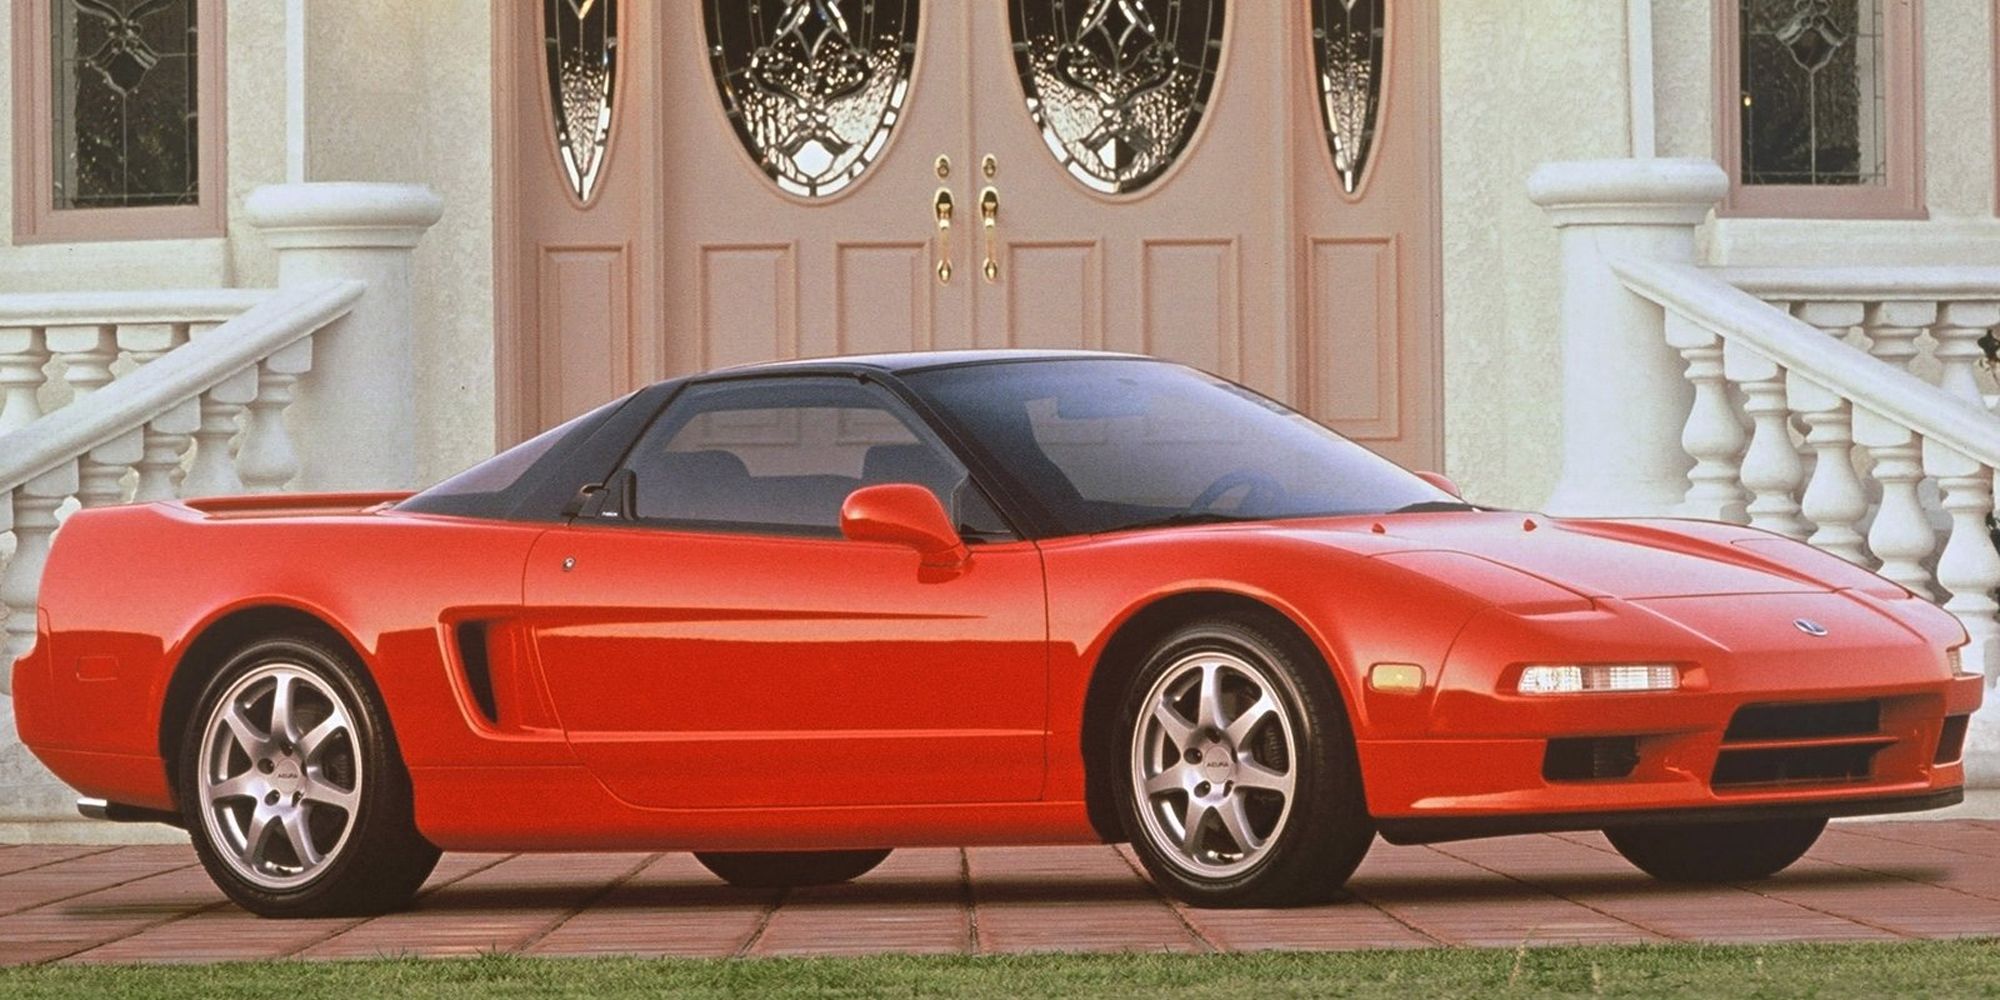 Front 3/4 view of a red NSX